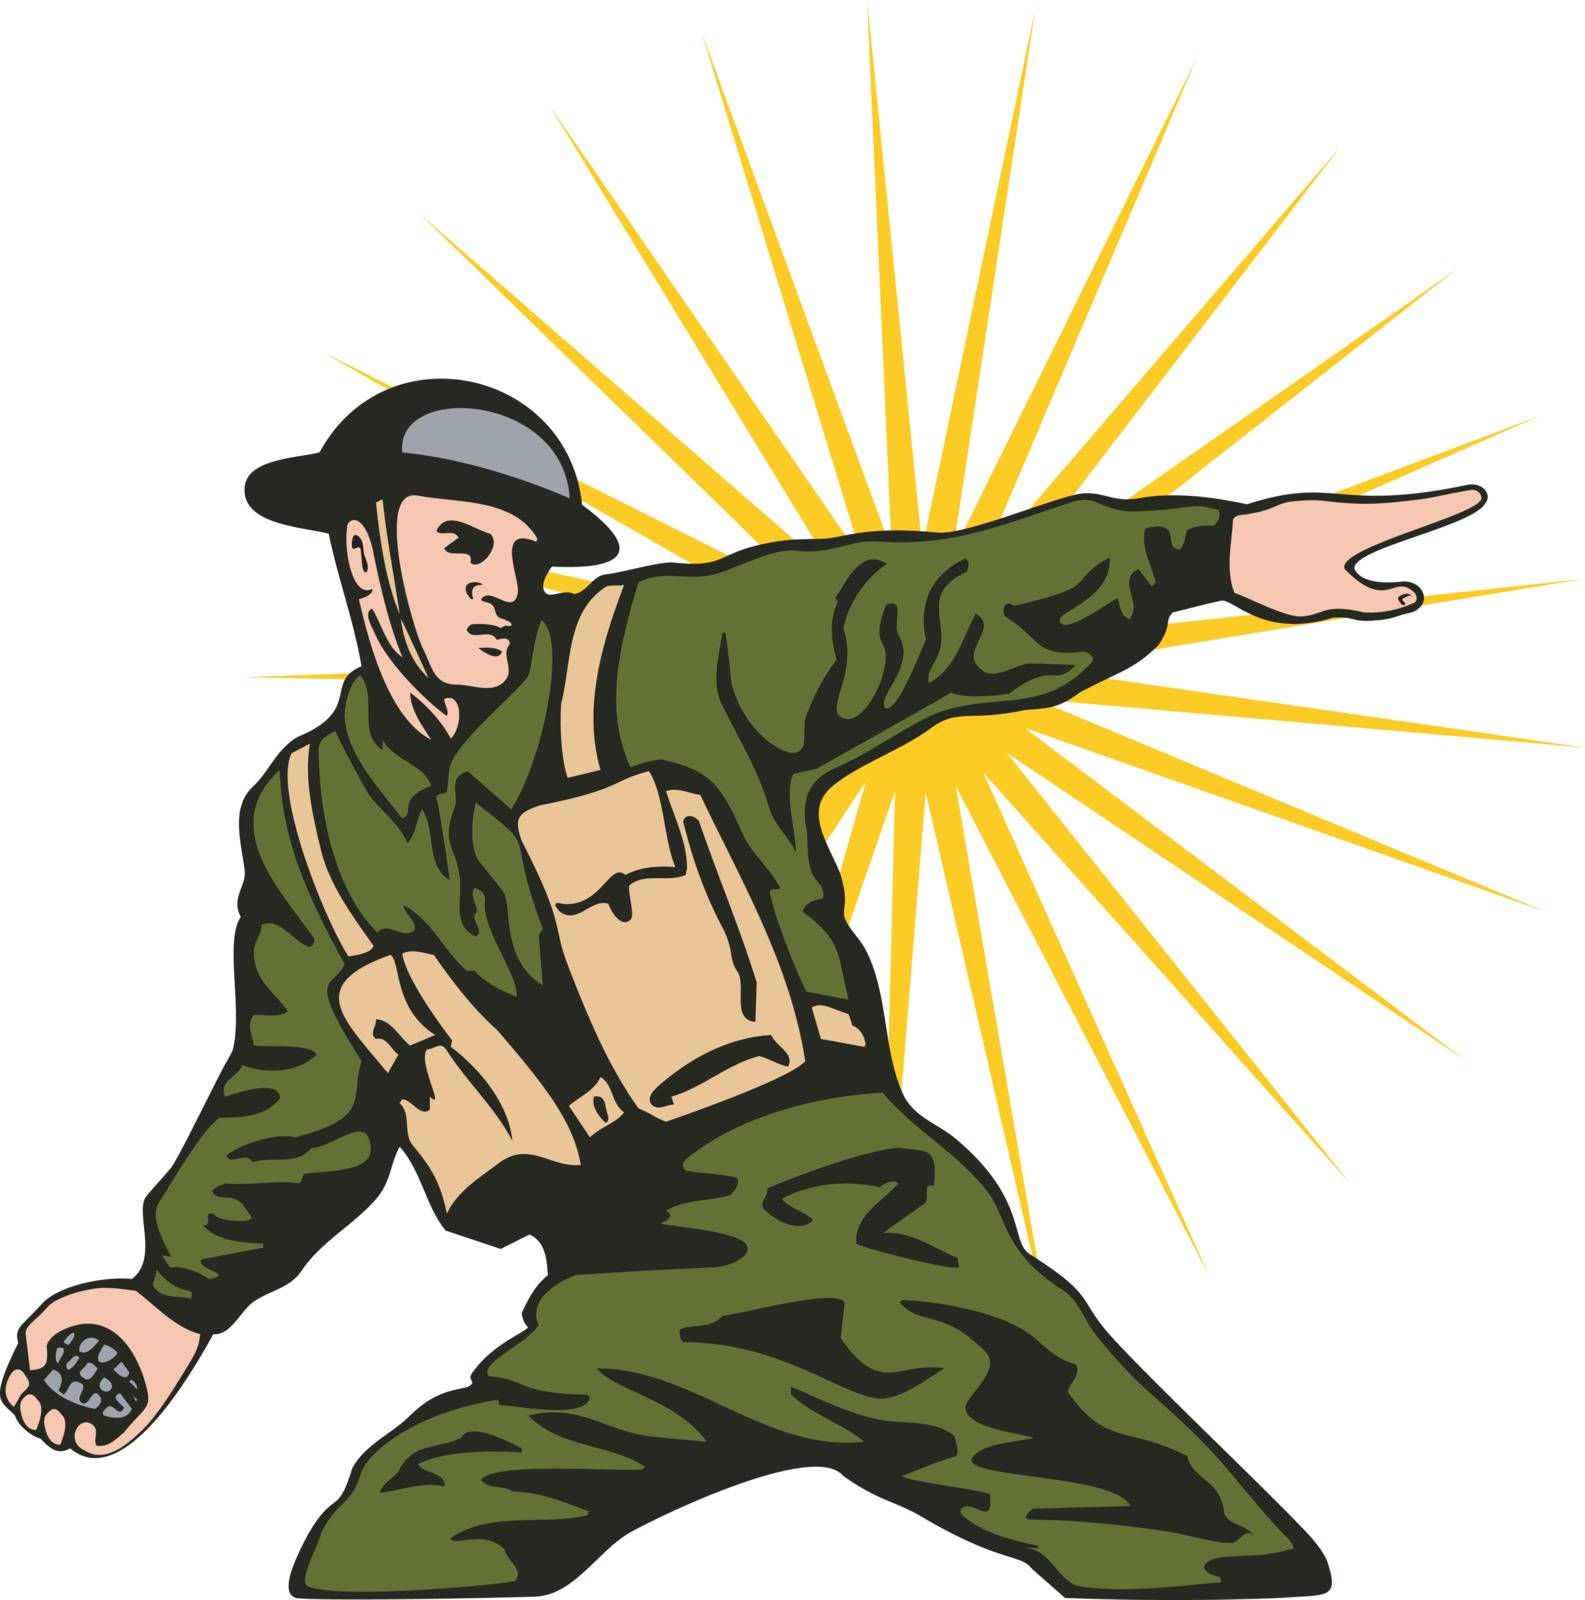 Illustration of soldier throwing hand grenade with sunburst in the background set on white background done in retro style. 